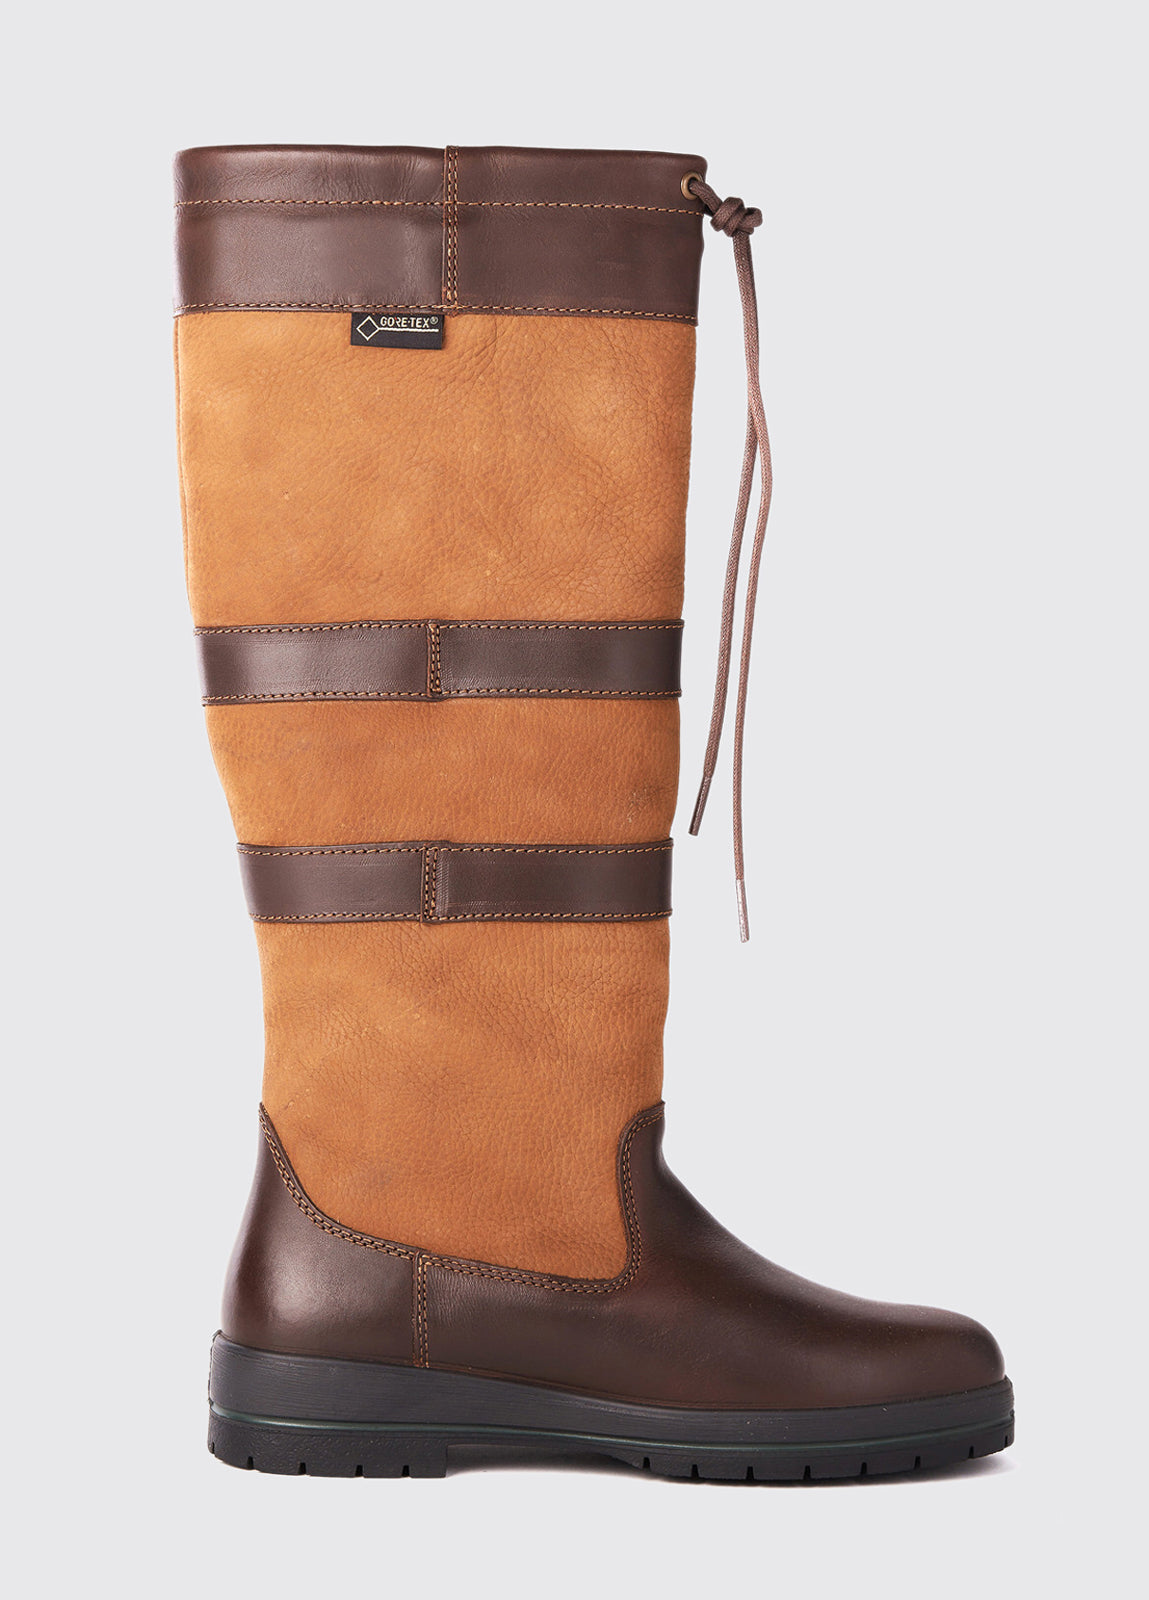 Dubarry Galway Country Boot in Brown Mahogany